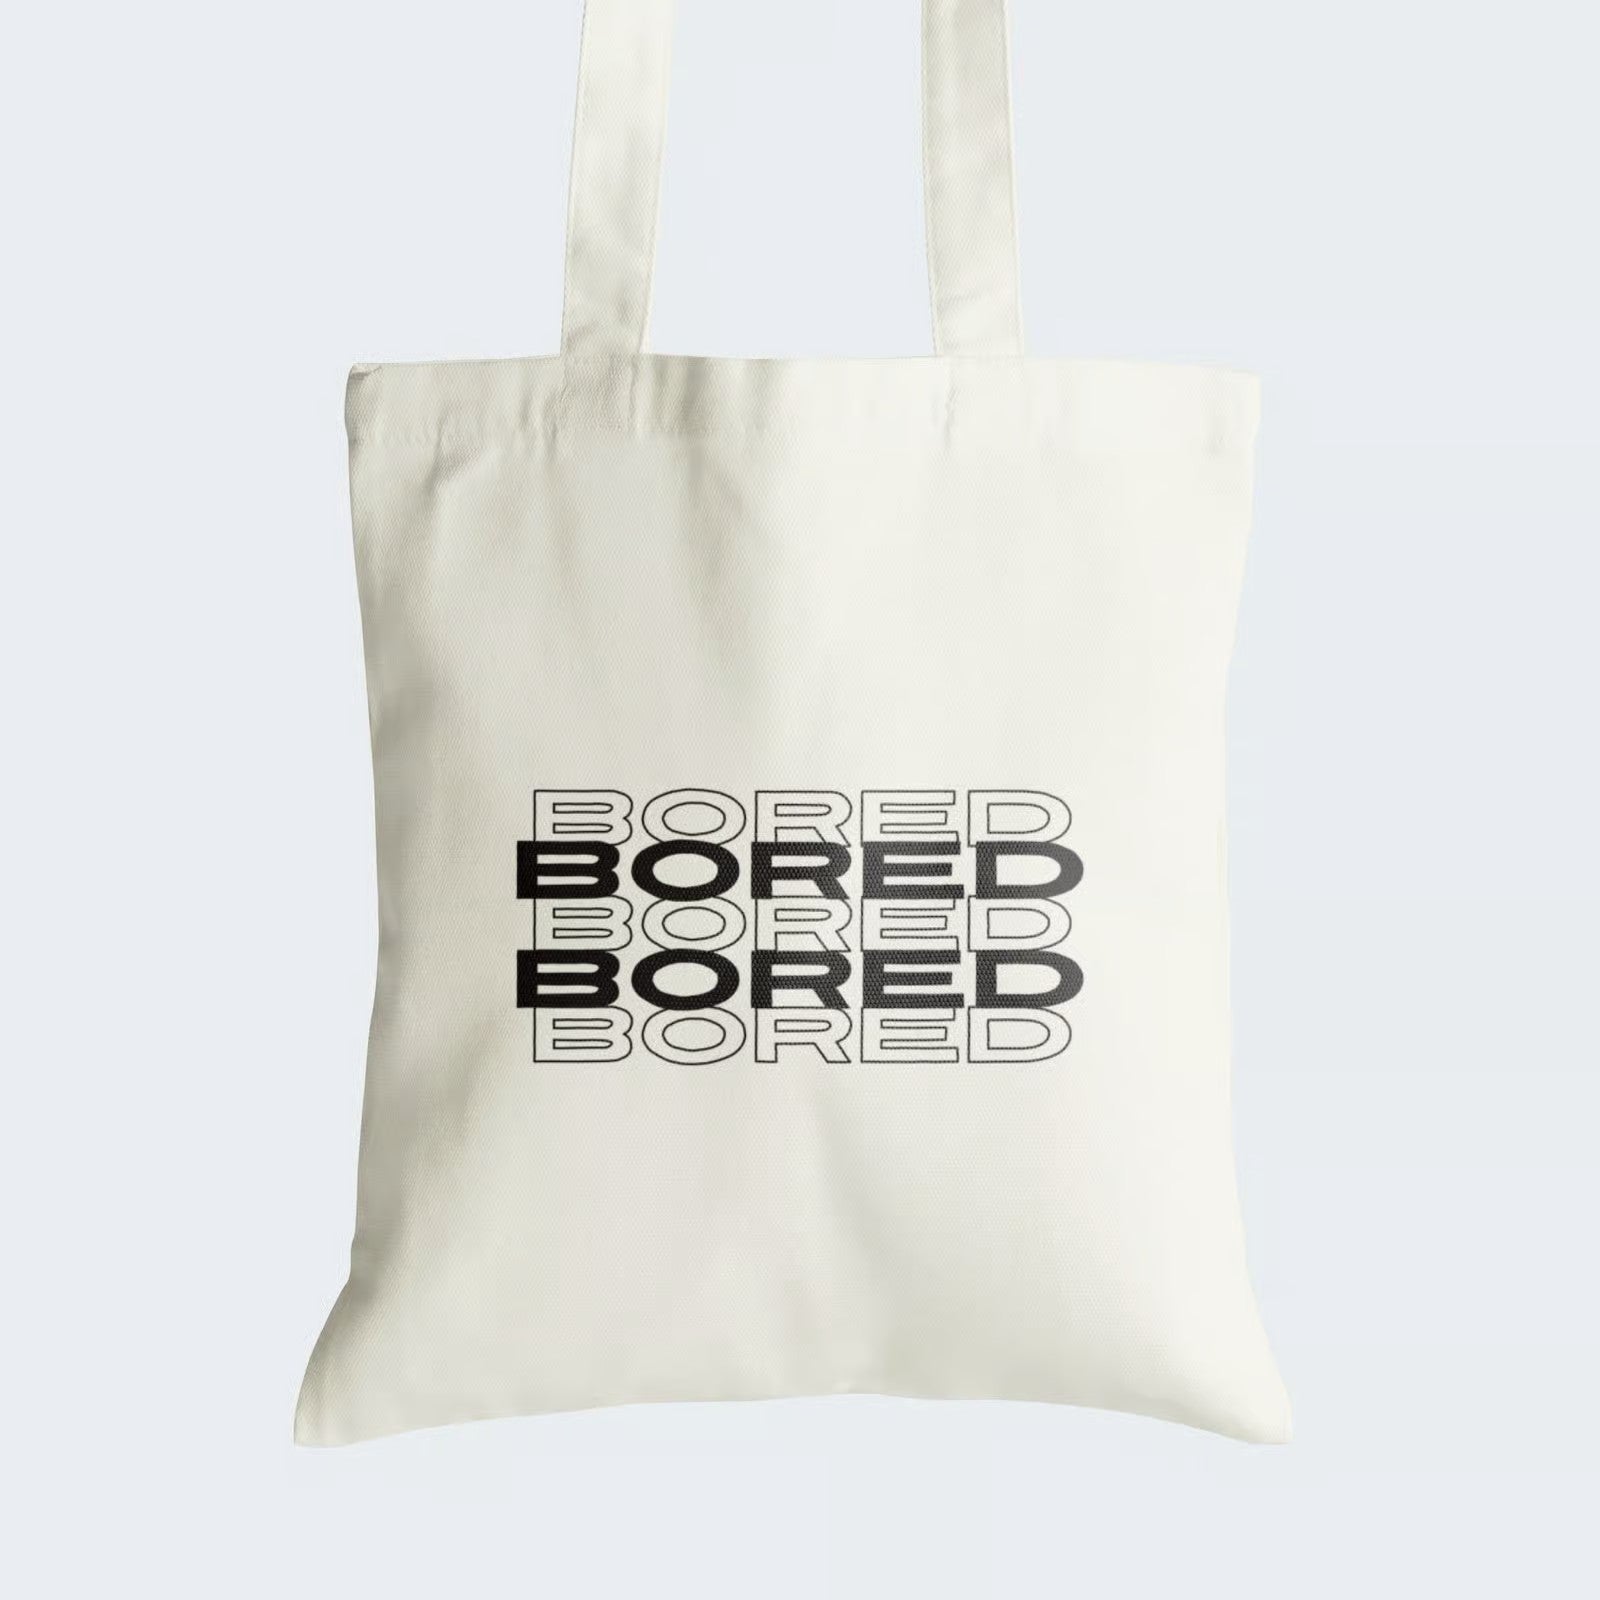 Elevate your style and make a bold statement with our "BORED" Cotton Canvas Tote Bag. This striking tote features the word "BORED" written five times, alternating between bold black and crisp white letters, creating a captivating visual impact. Crafted for durability and style, it includes a secure zipper closure for daily convenience. Express your mood with flair and individuality using our fashionable Cotton Canvas Tote Bag. Order yours today and let your style speak volumes!